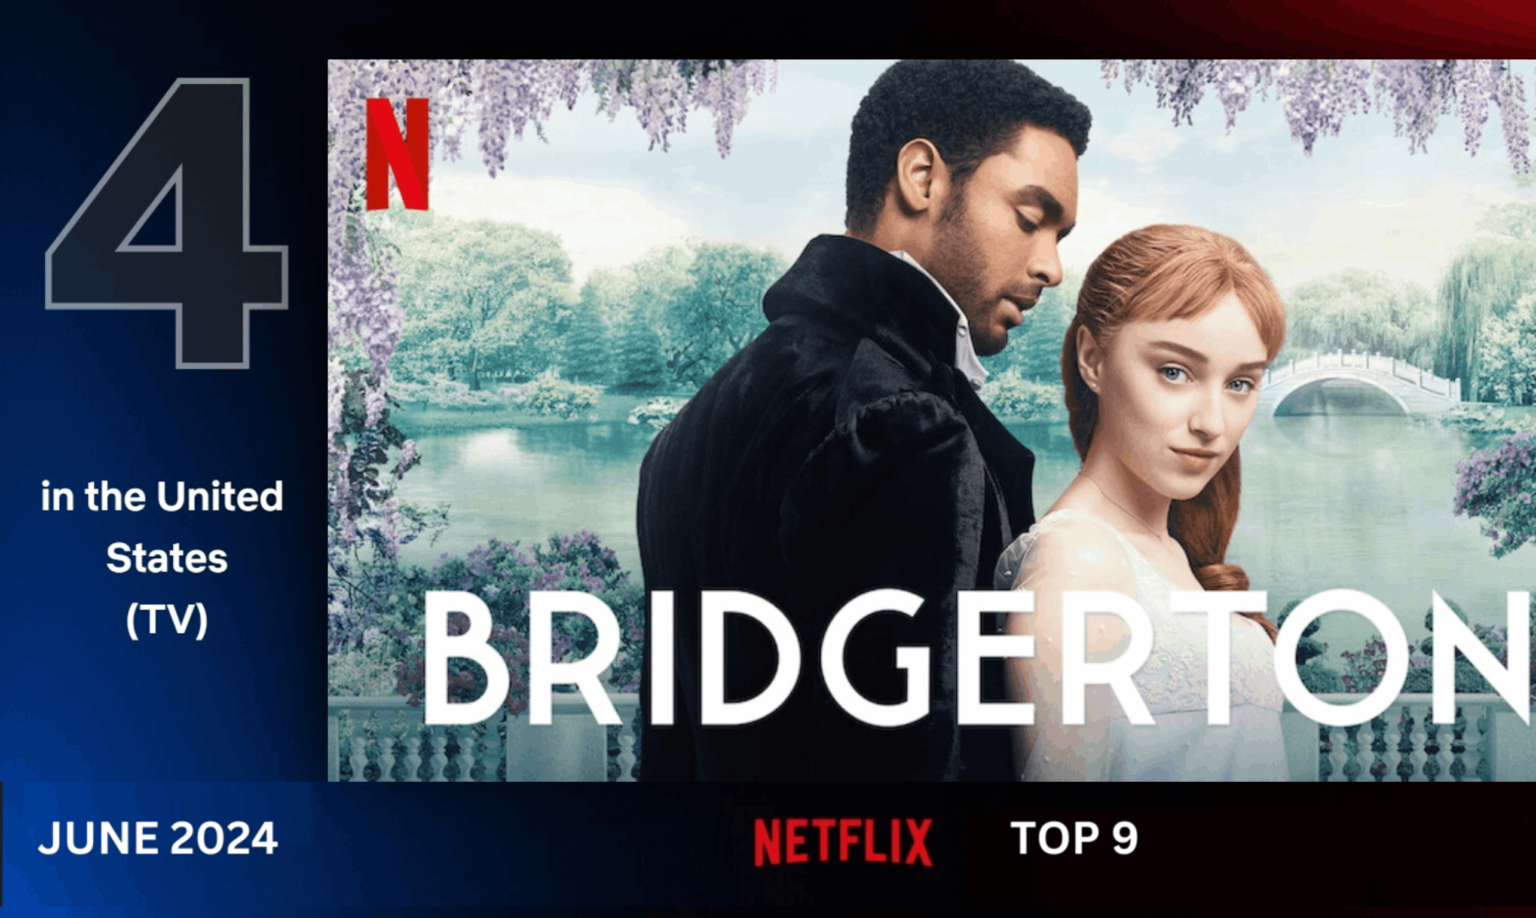 Top-9-Most-Popular-TV-Shows-on-Netflix-in-United-State-Thumbnail-Image-Cherry-streamers-6